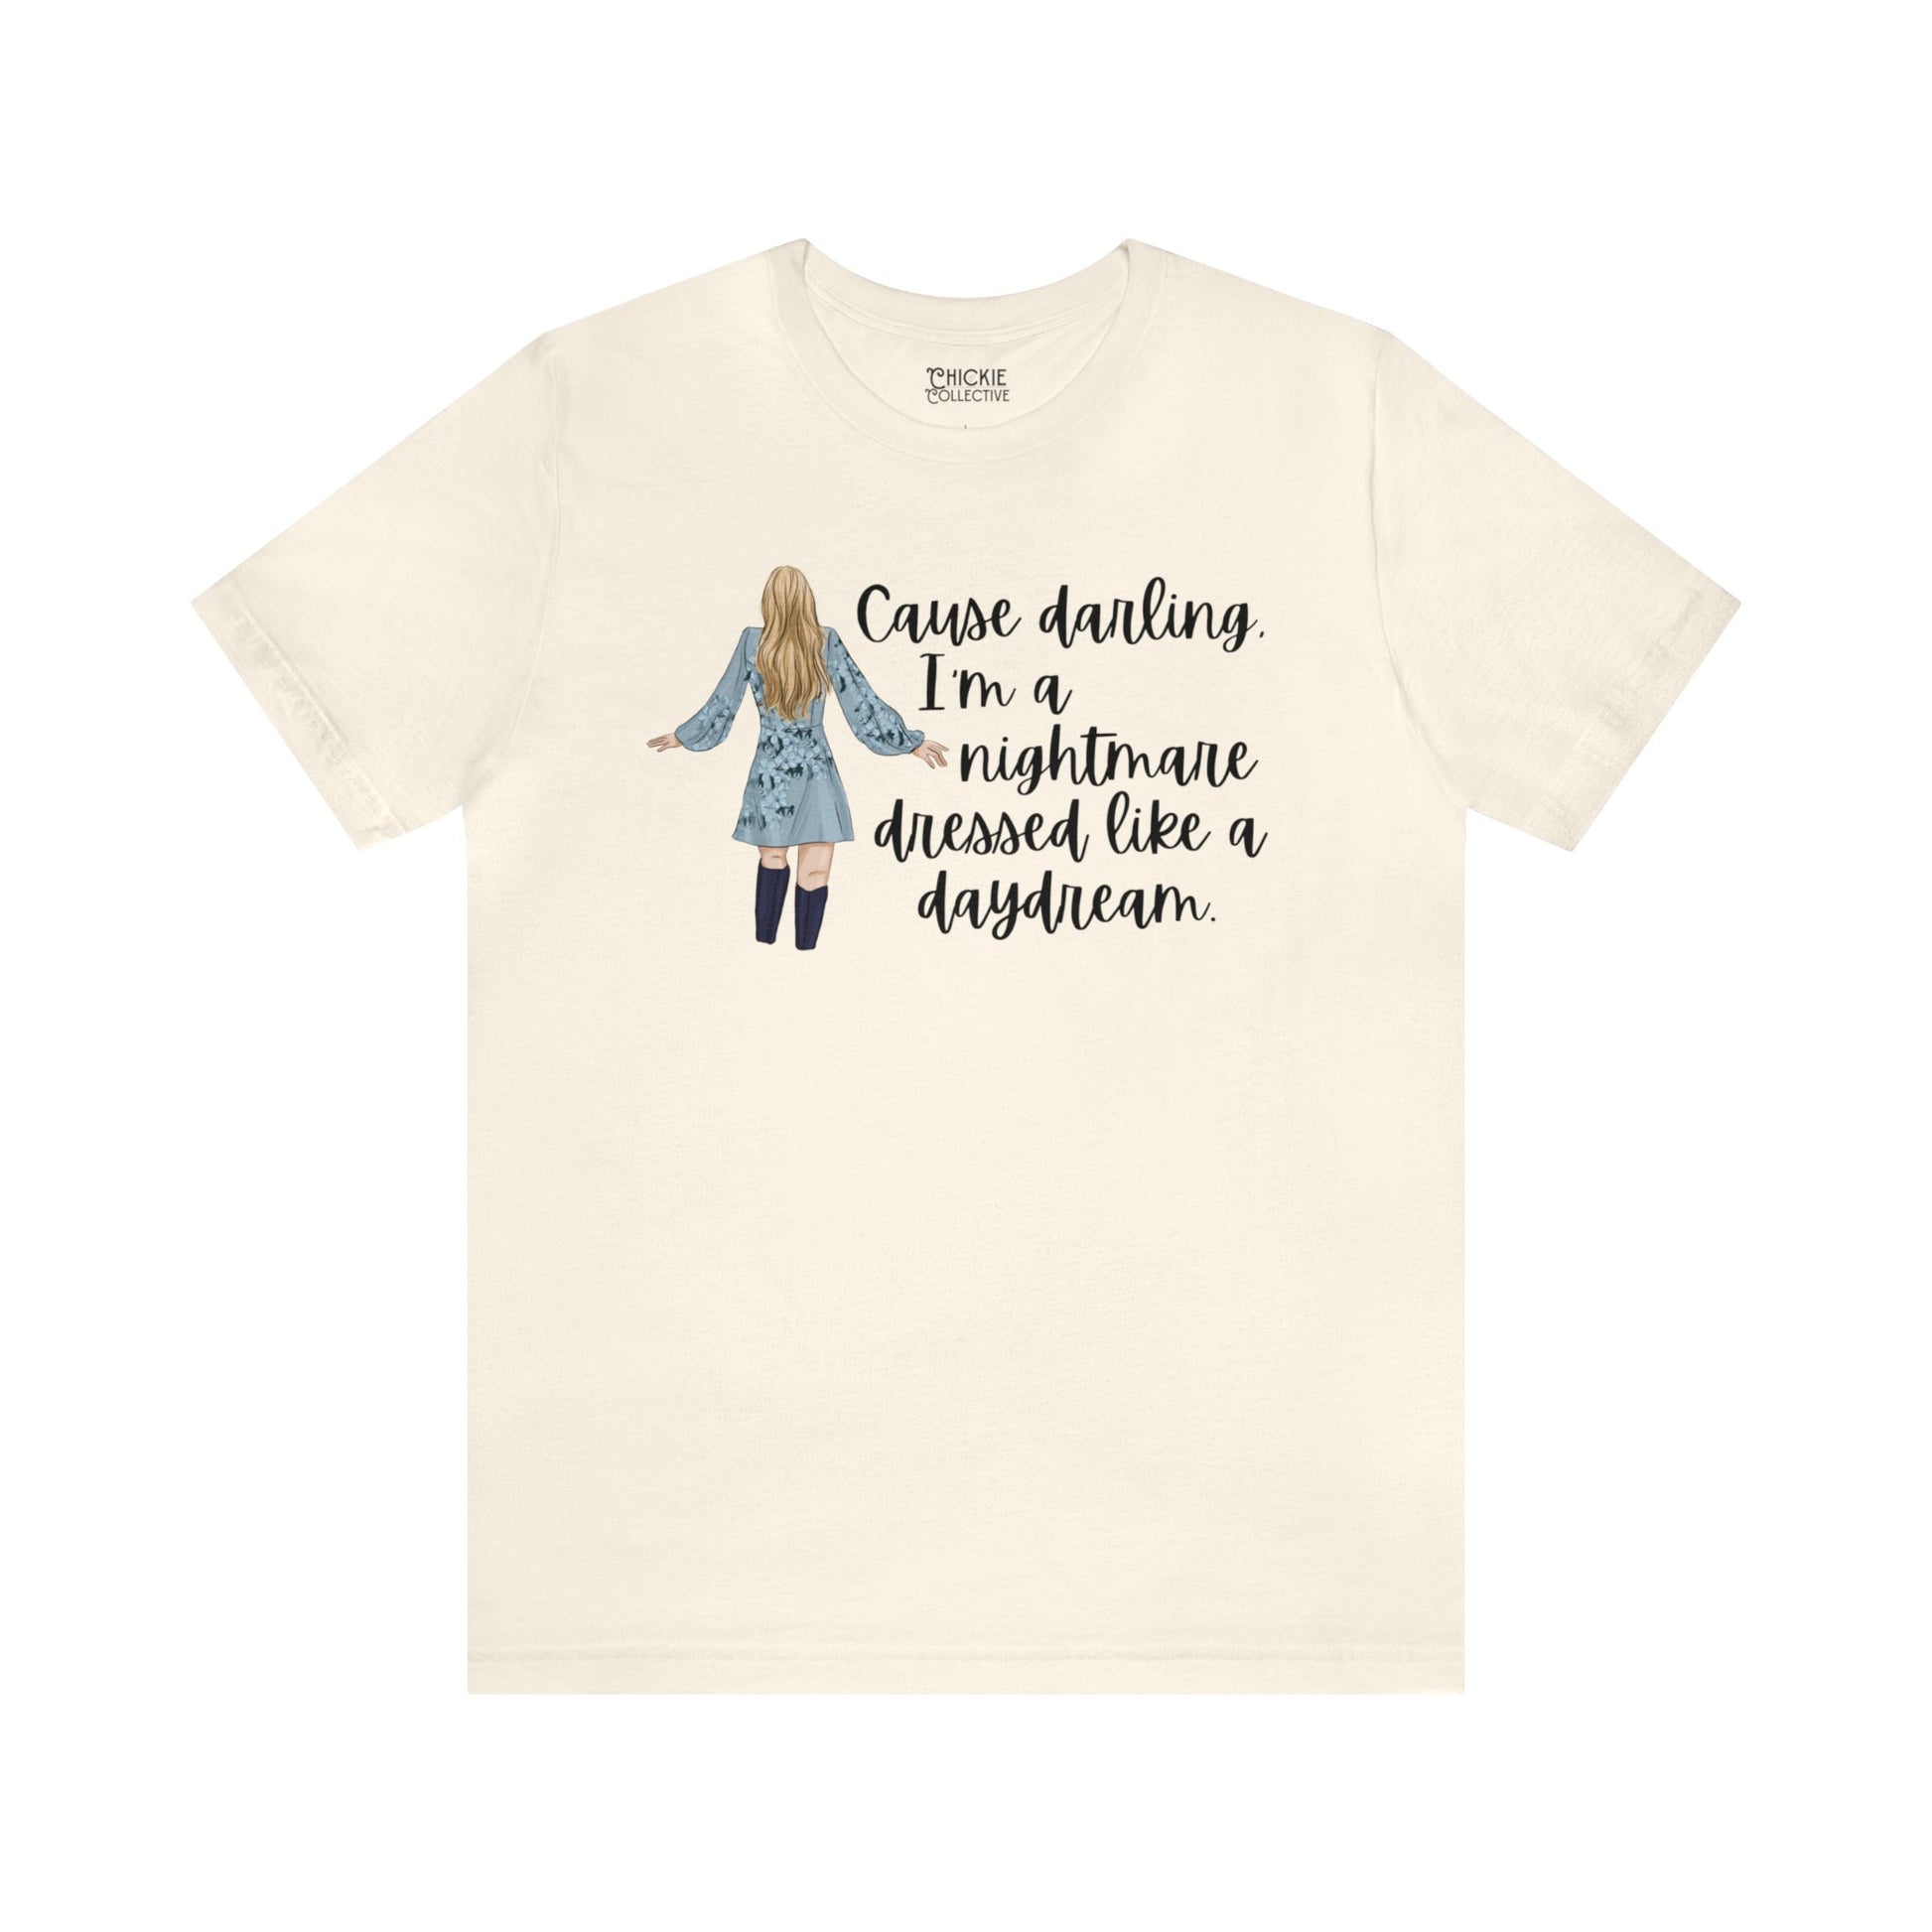 Taylor Swift Preppy Picture T-Shirt - Cause Darling I'm A Nightmare T-Shirt Natural S  - Chickie Collective